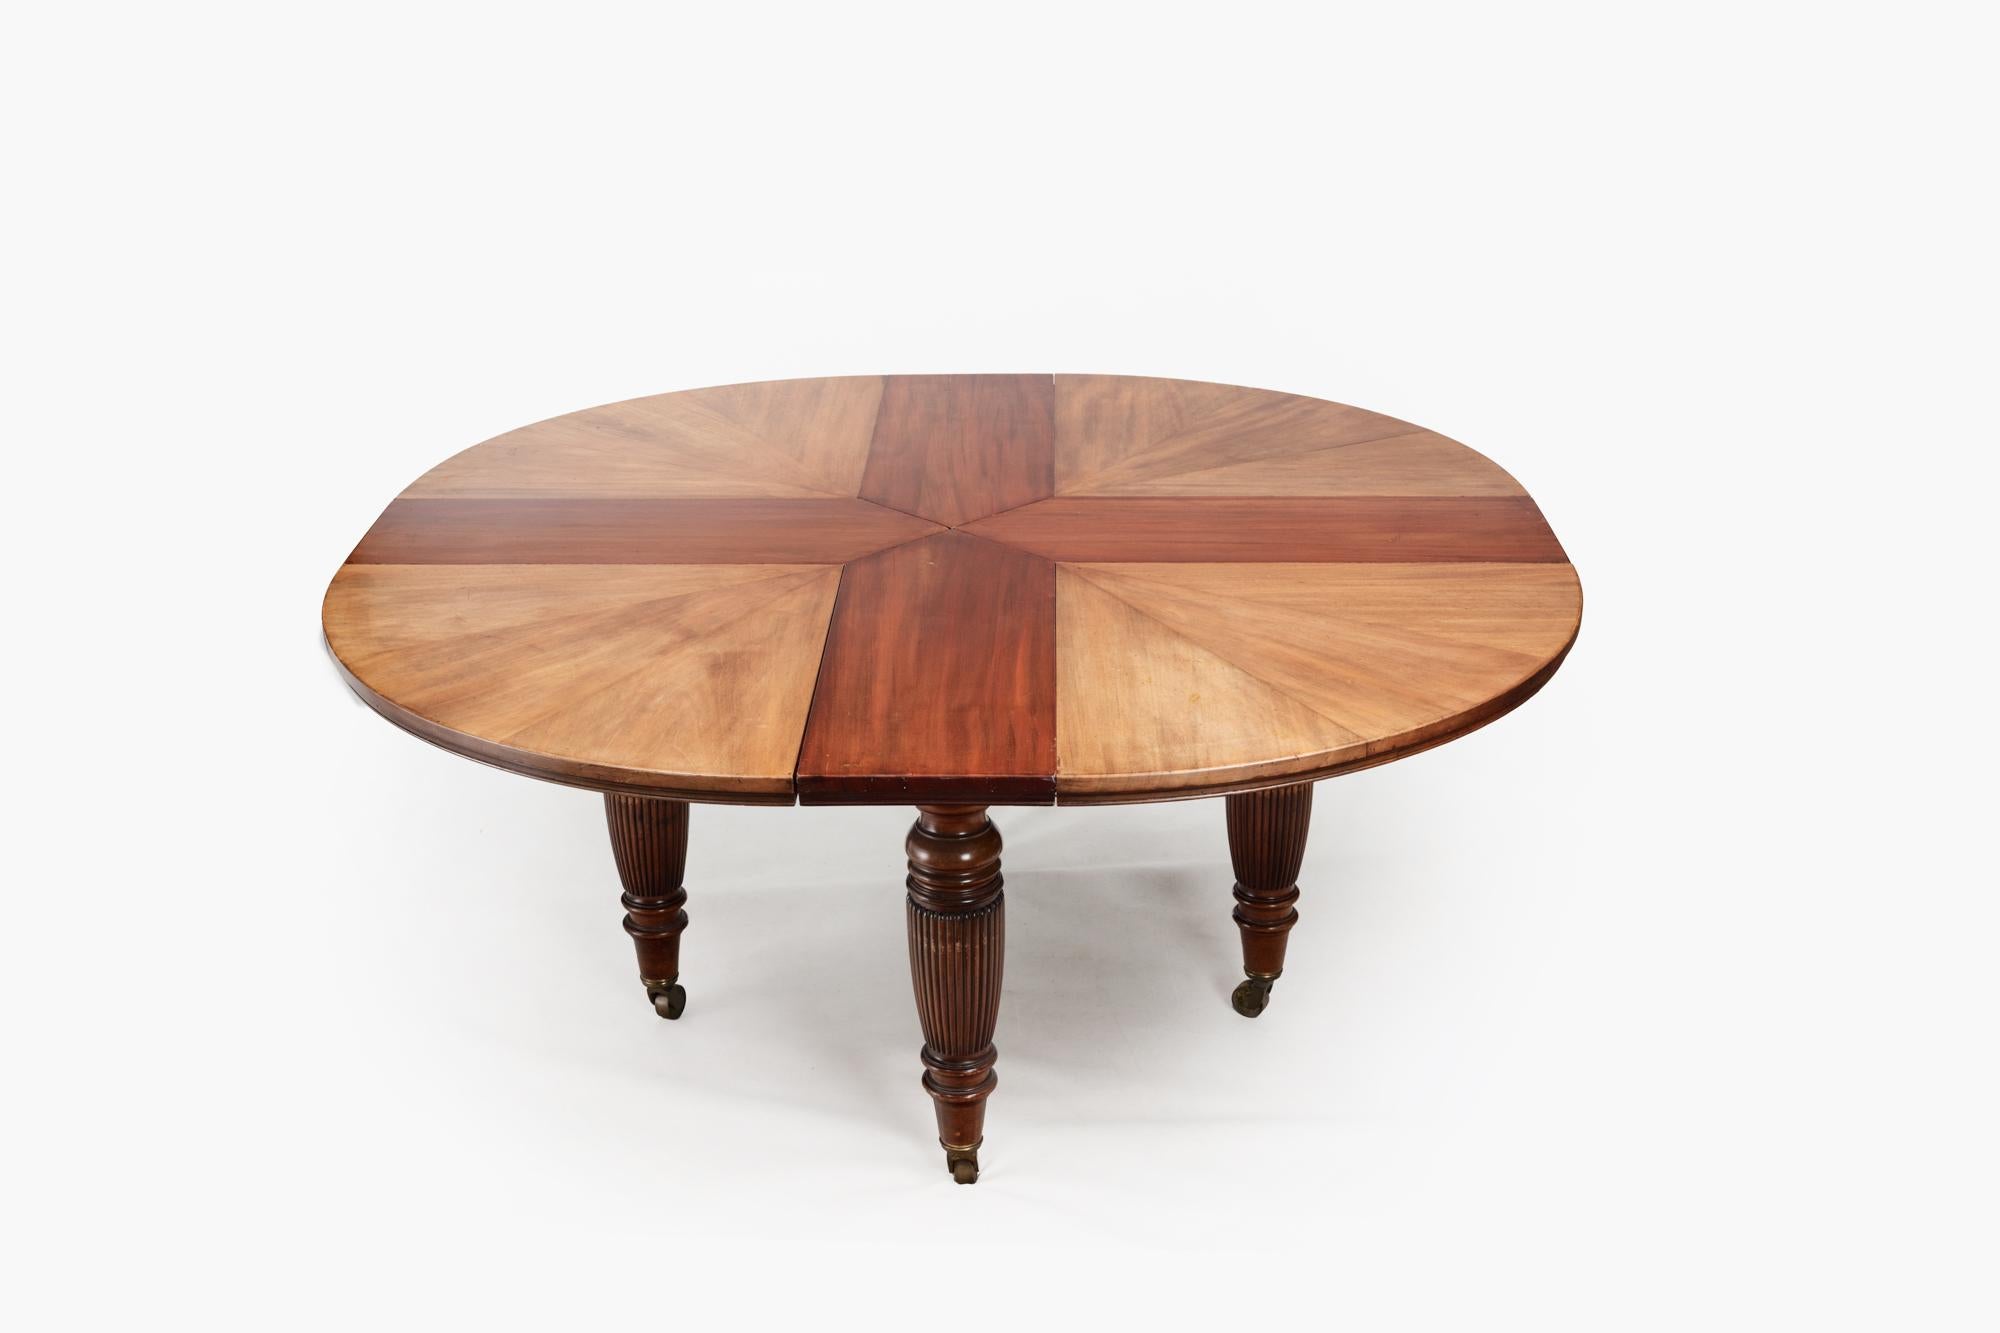 19th Century ‘Jupe’ style extendable dining table stamped and numbered Maple & Co of London. This circular mahogany dining table has a segmented top supported on four turned and reeded legs. The table has four removable leaves that can be added,